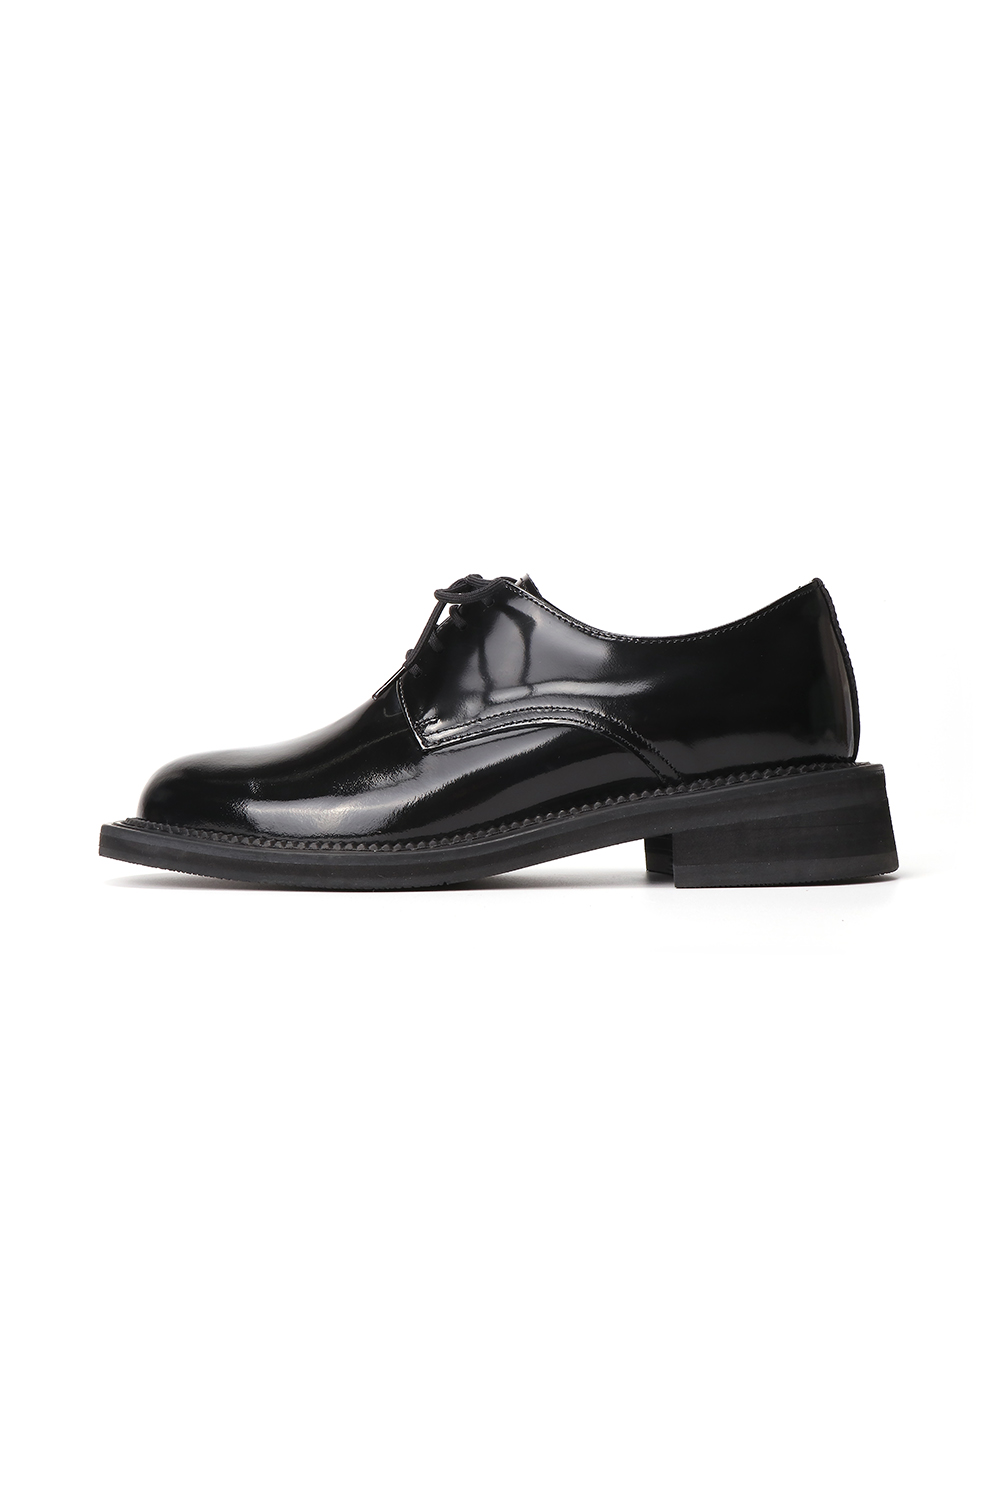 MALO ROUND DERBY SHOES [BLACK]